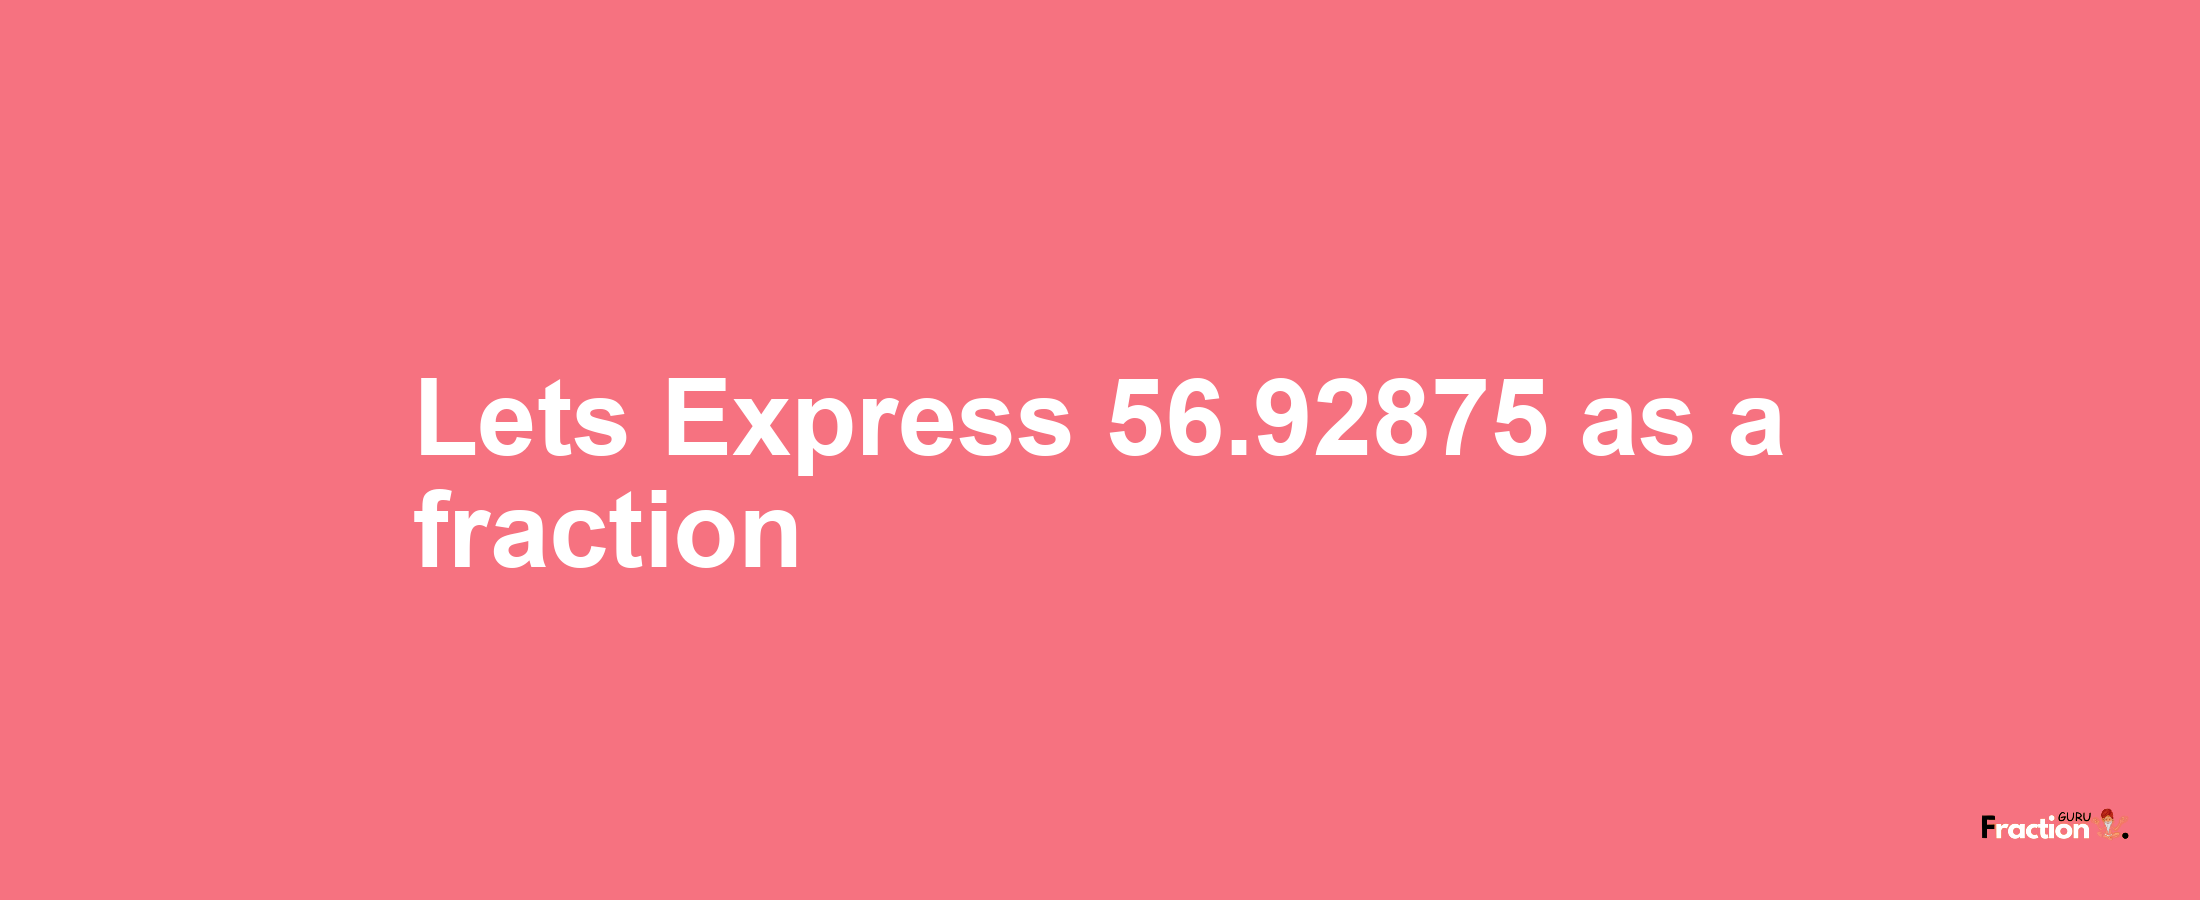 Lets Express 56.92875 as afraction